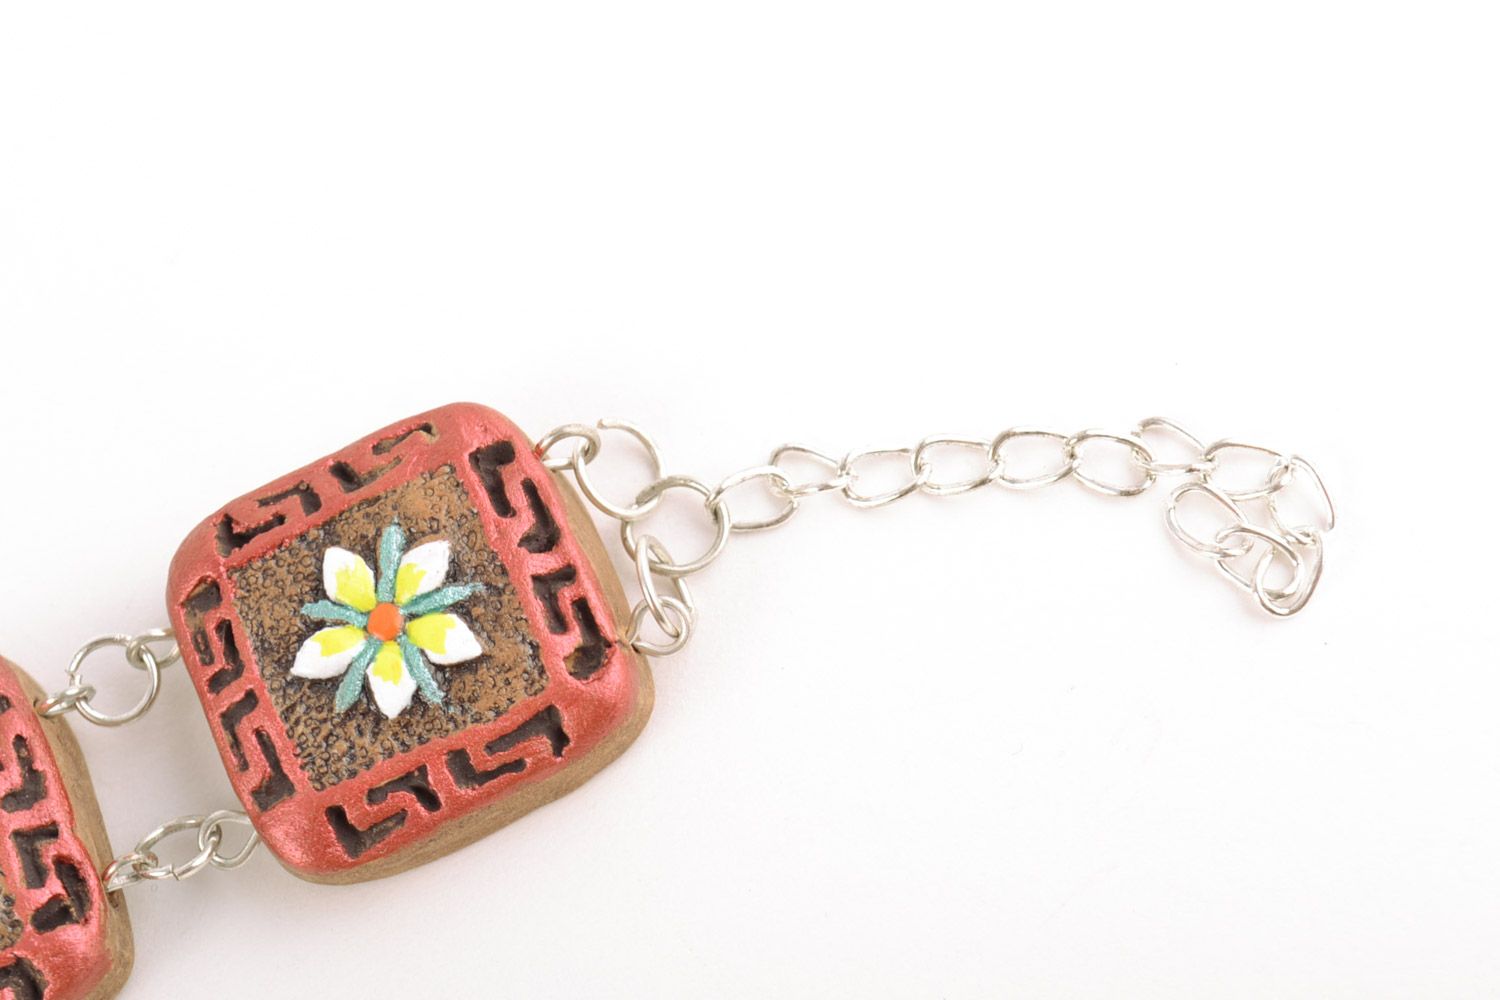 Handmade clay bracelet with square details painted with acrylics photo 2